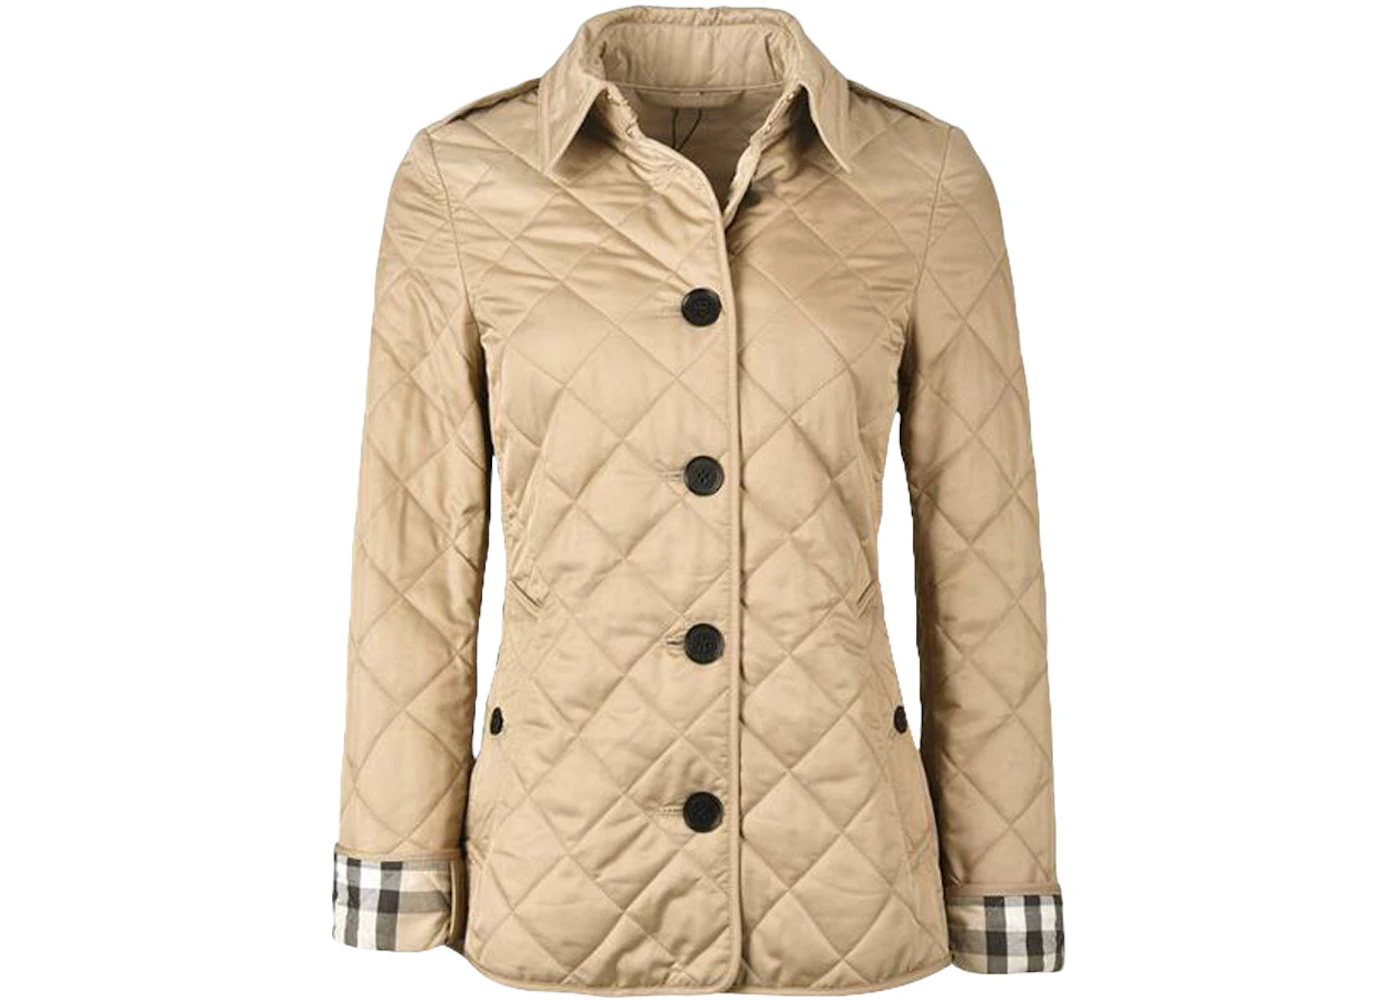 Burberry Quilted - Beige Diamond US Jacket